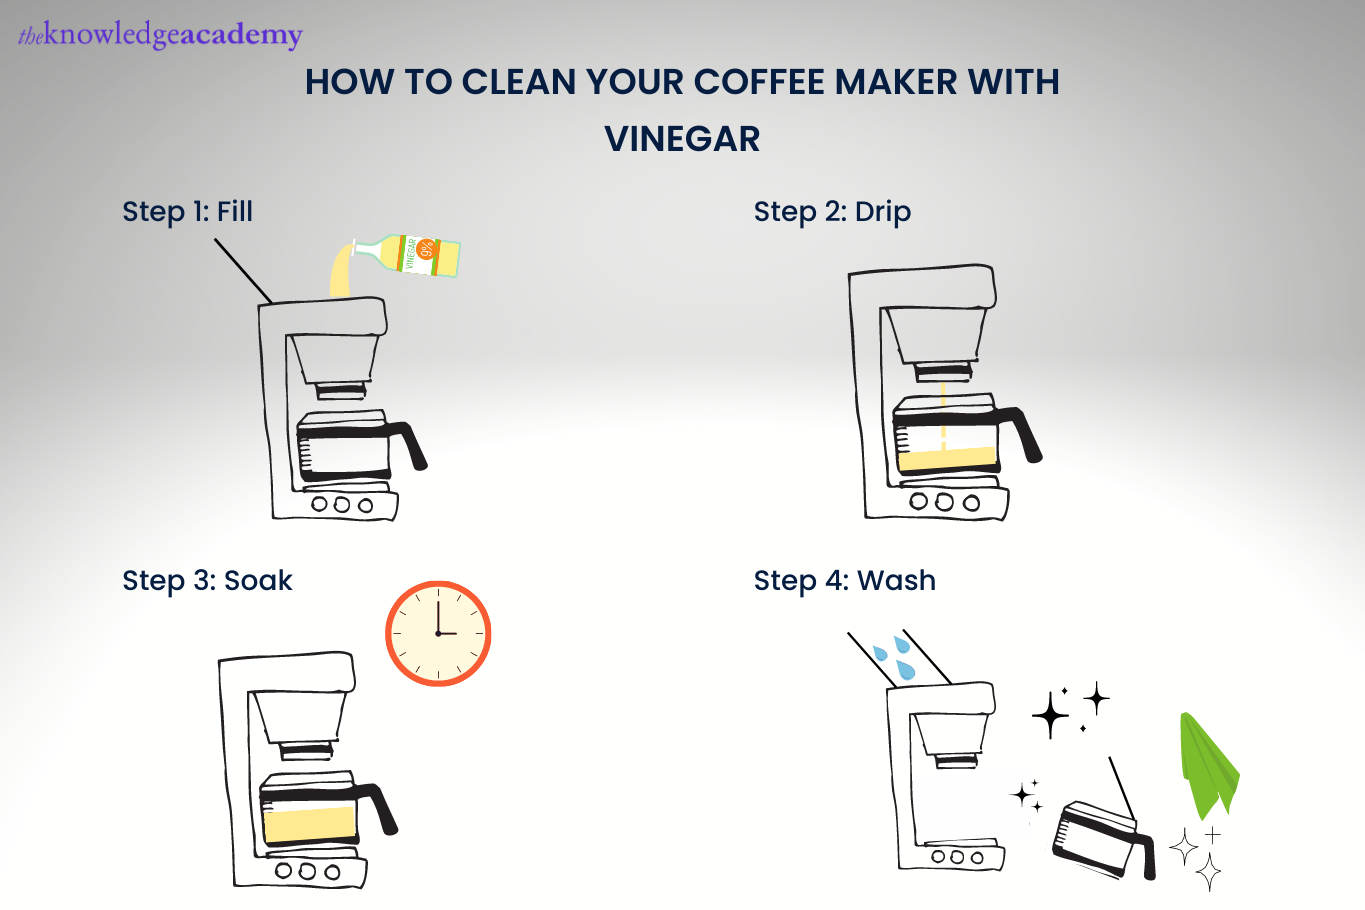 https://www.theknowledgeacademy.com/_files/images/How_to_Clean_Your_Coffee_Maker_With_Vinegar.png